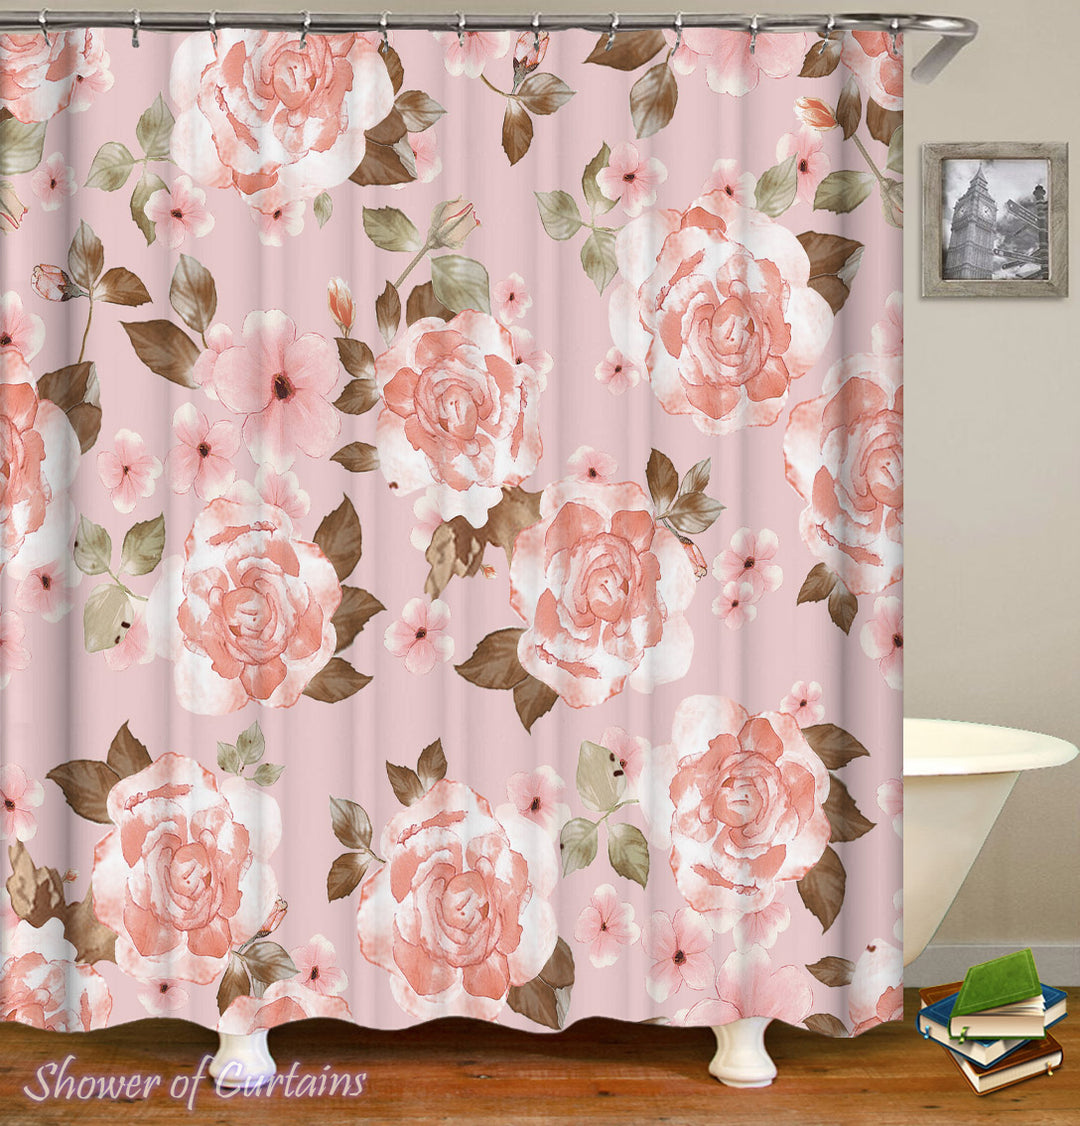 Floral Shower Curtain - Classic Pinkish Flowers